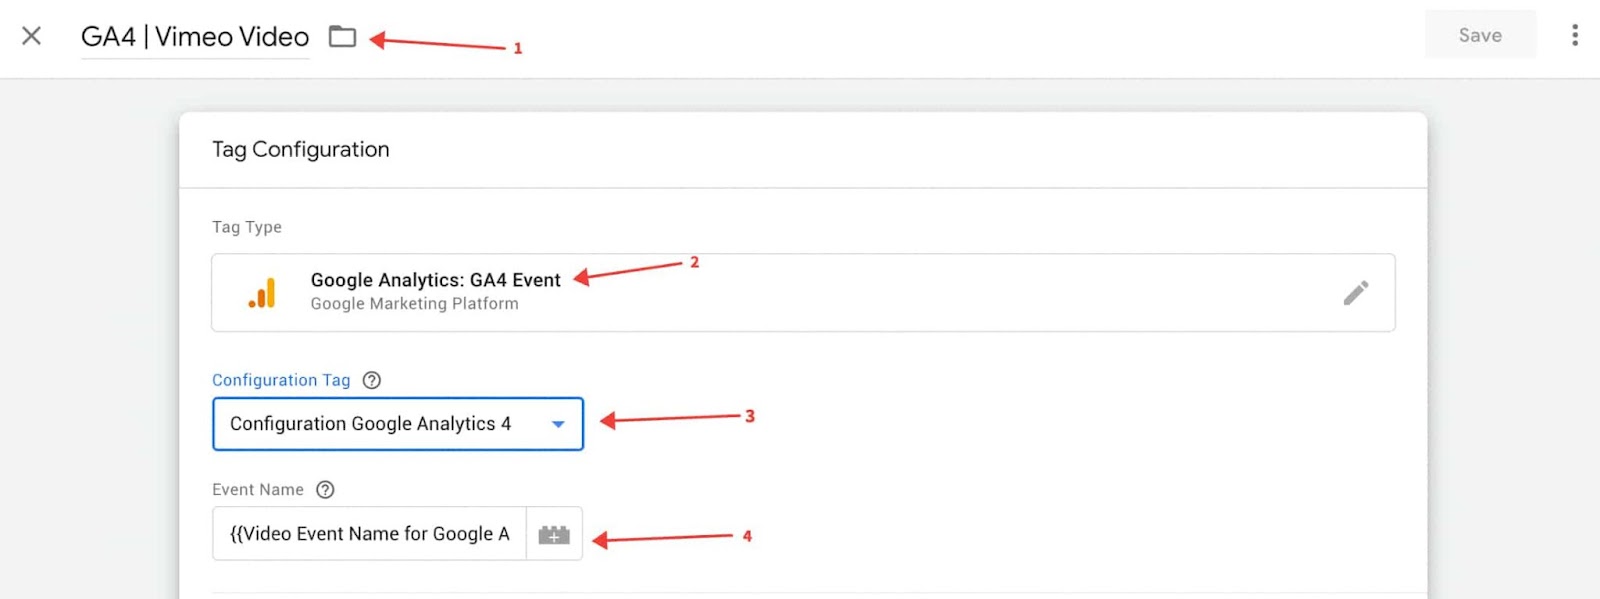 Create a new tag to send the data to Google Analytics 4